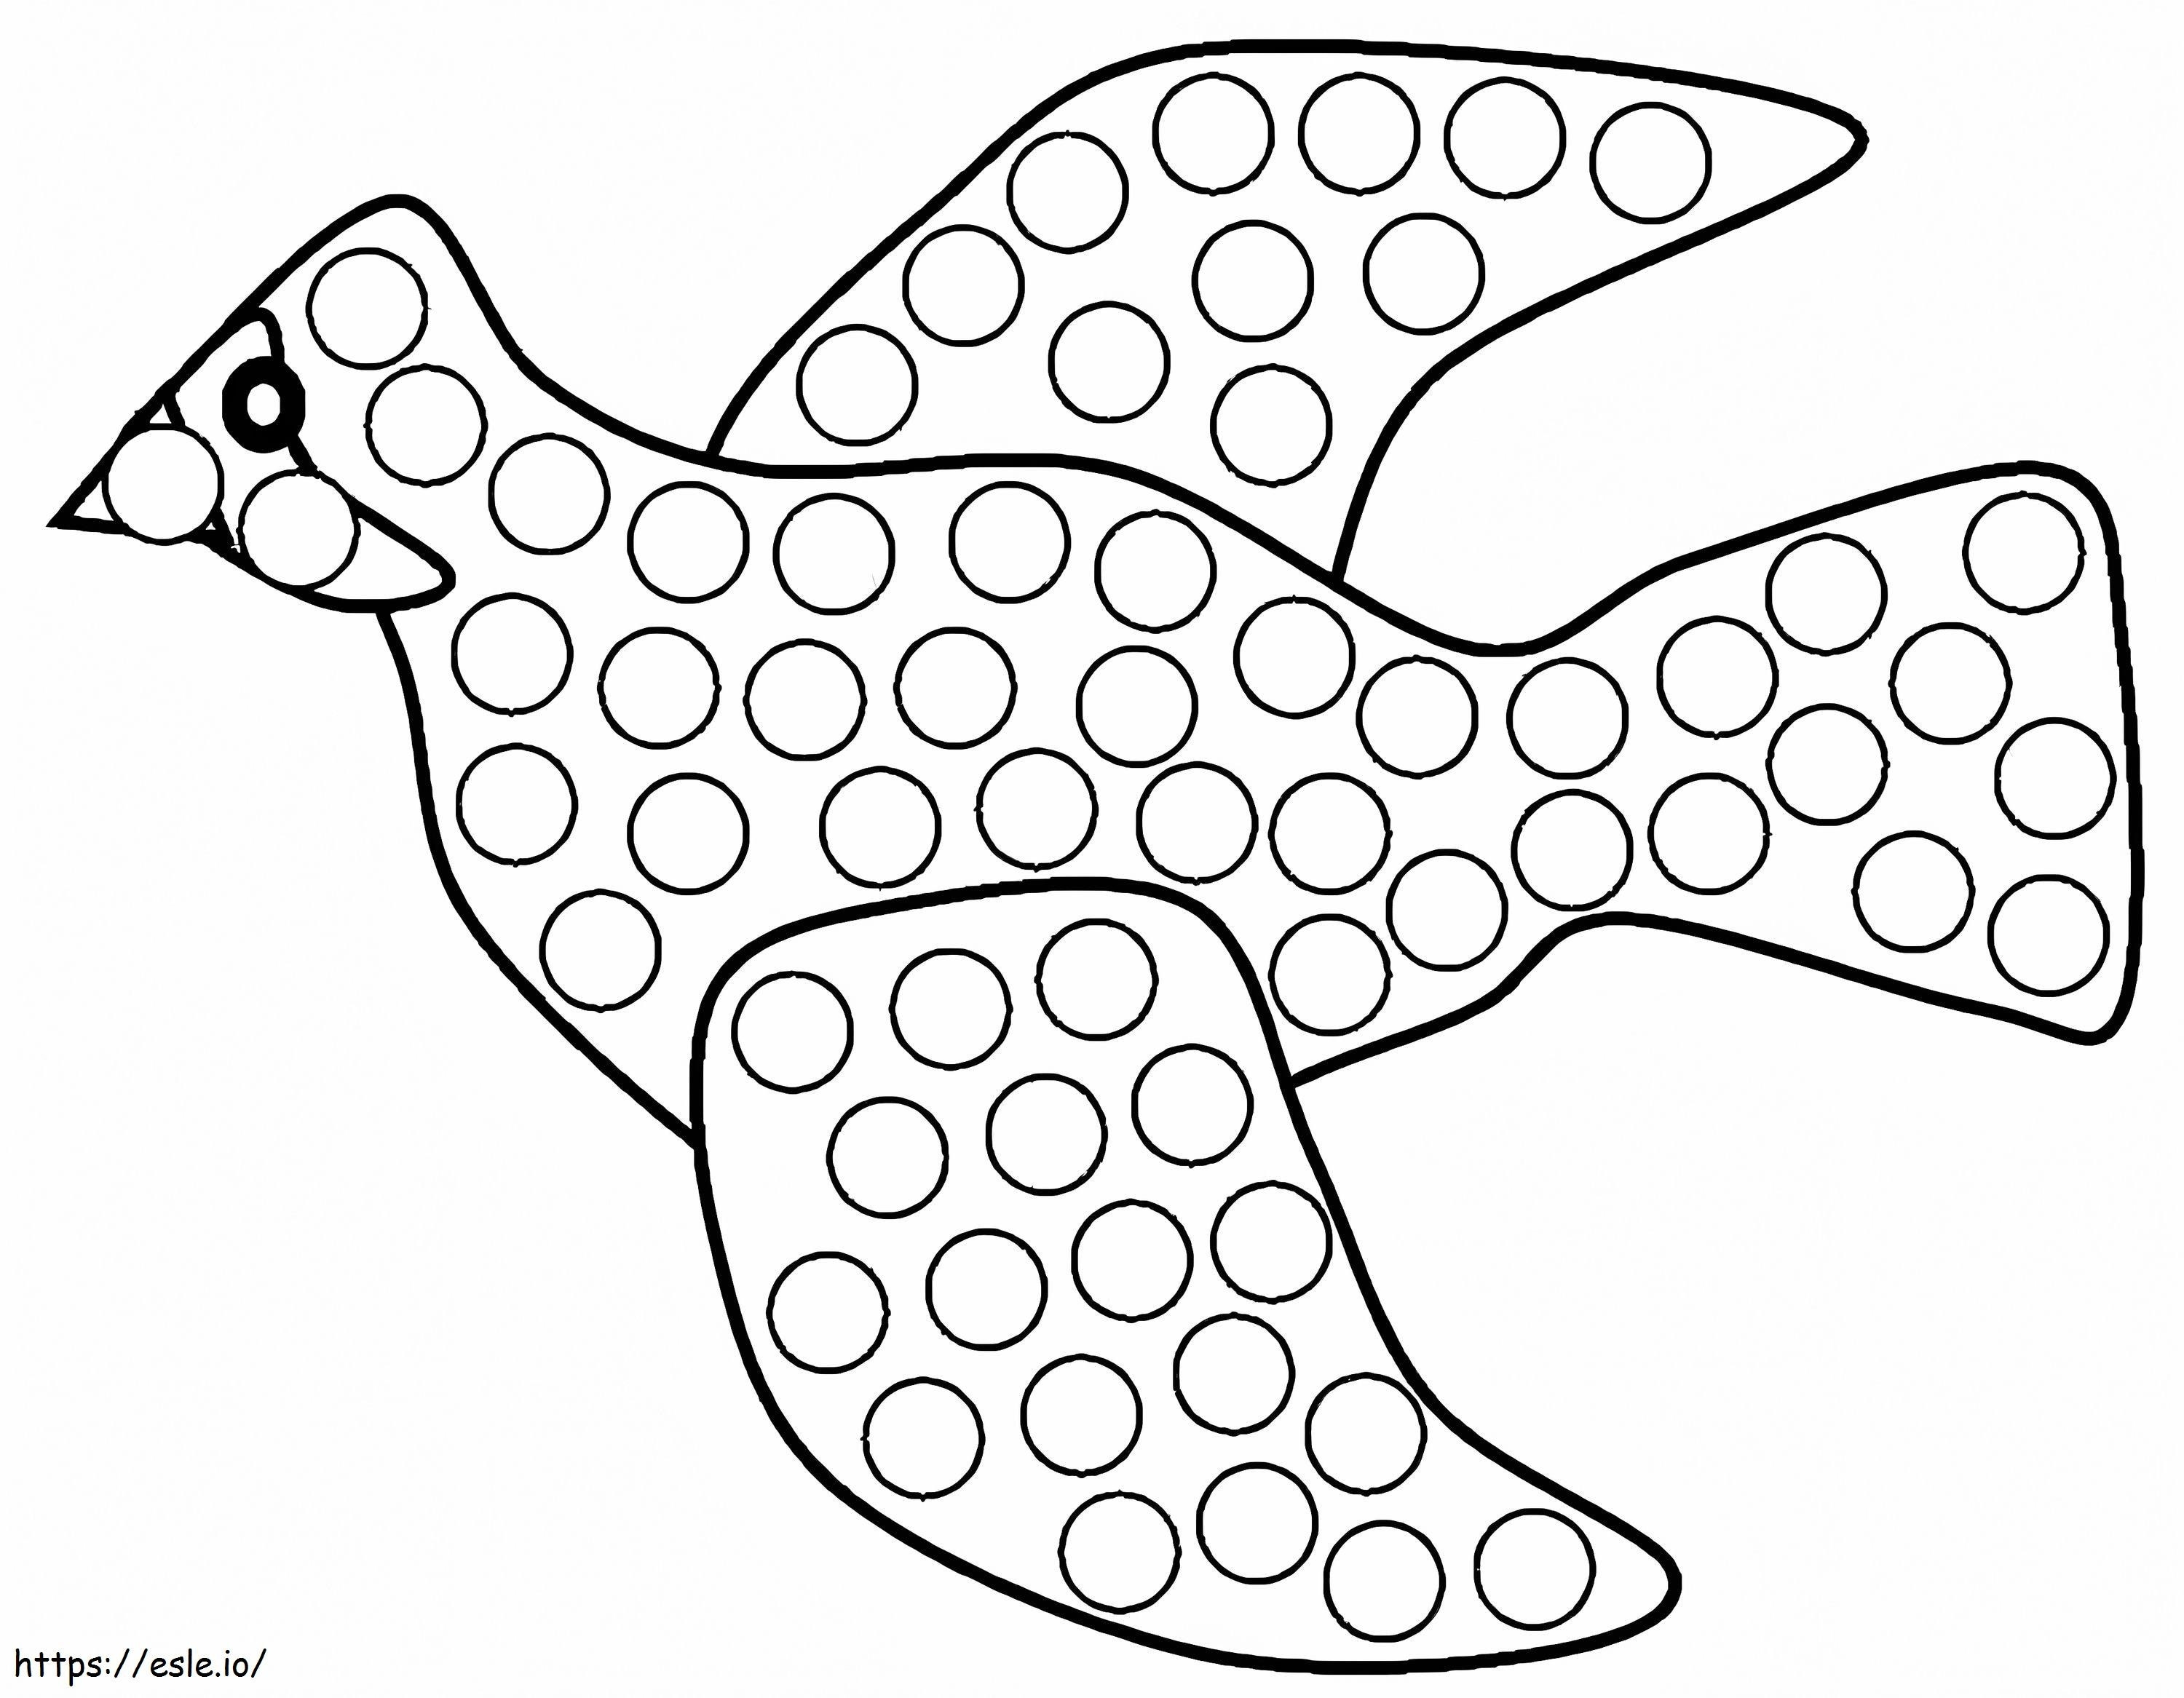 Bird Dot Marker coloring page